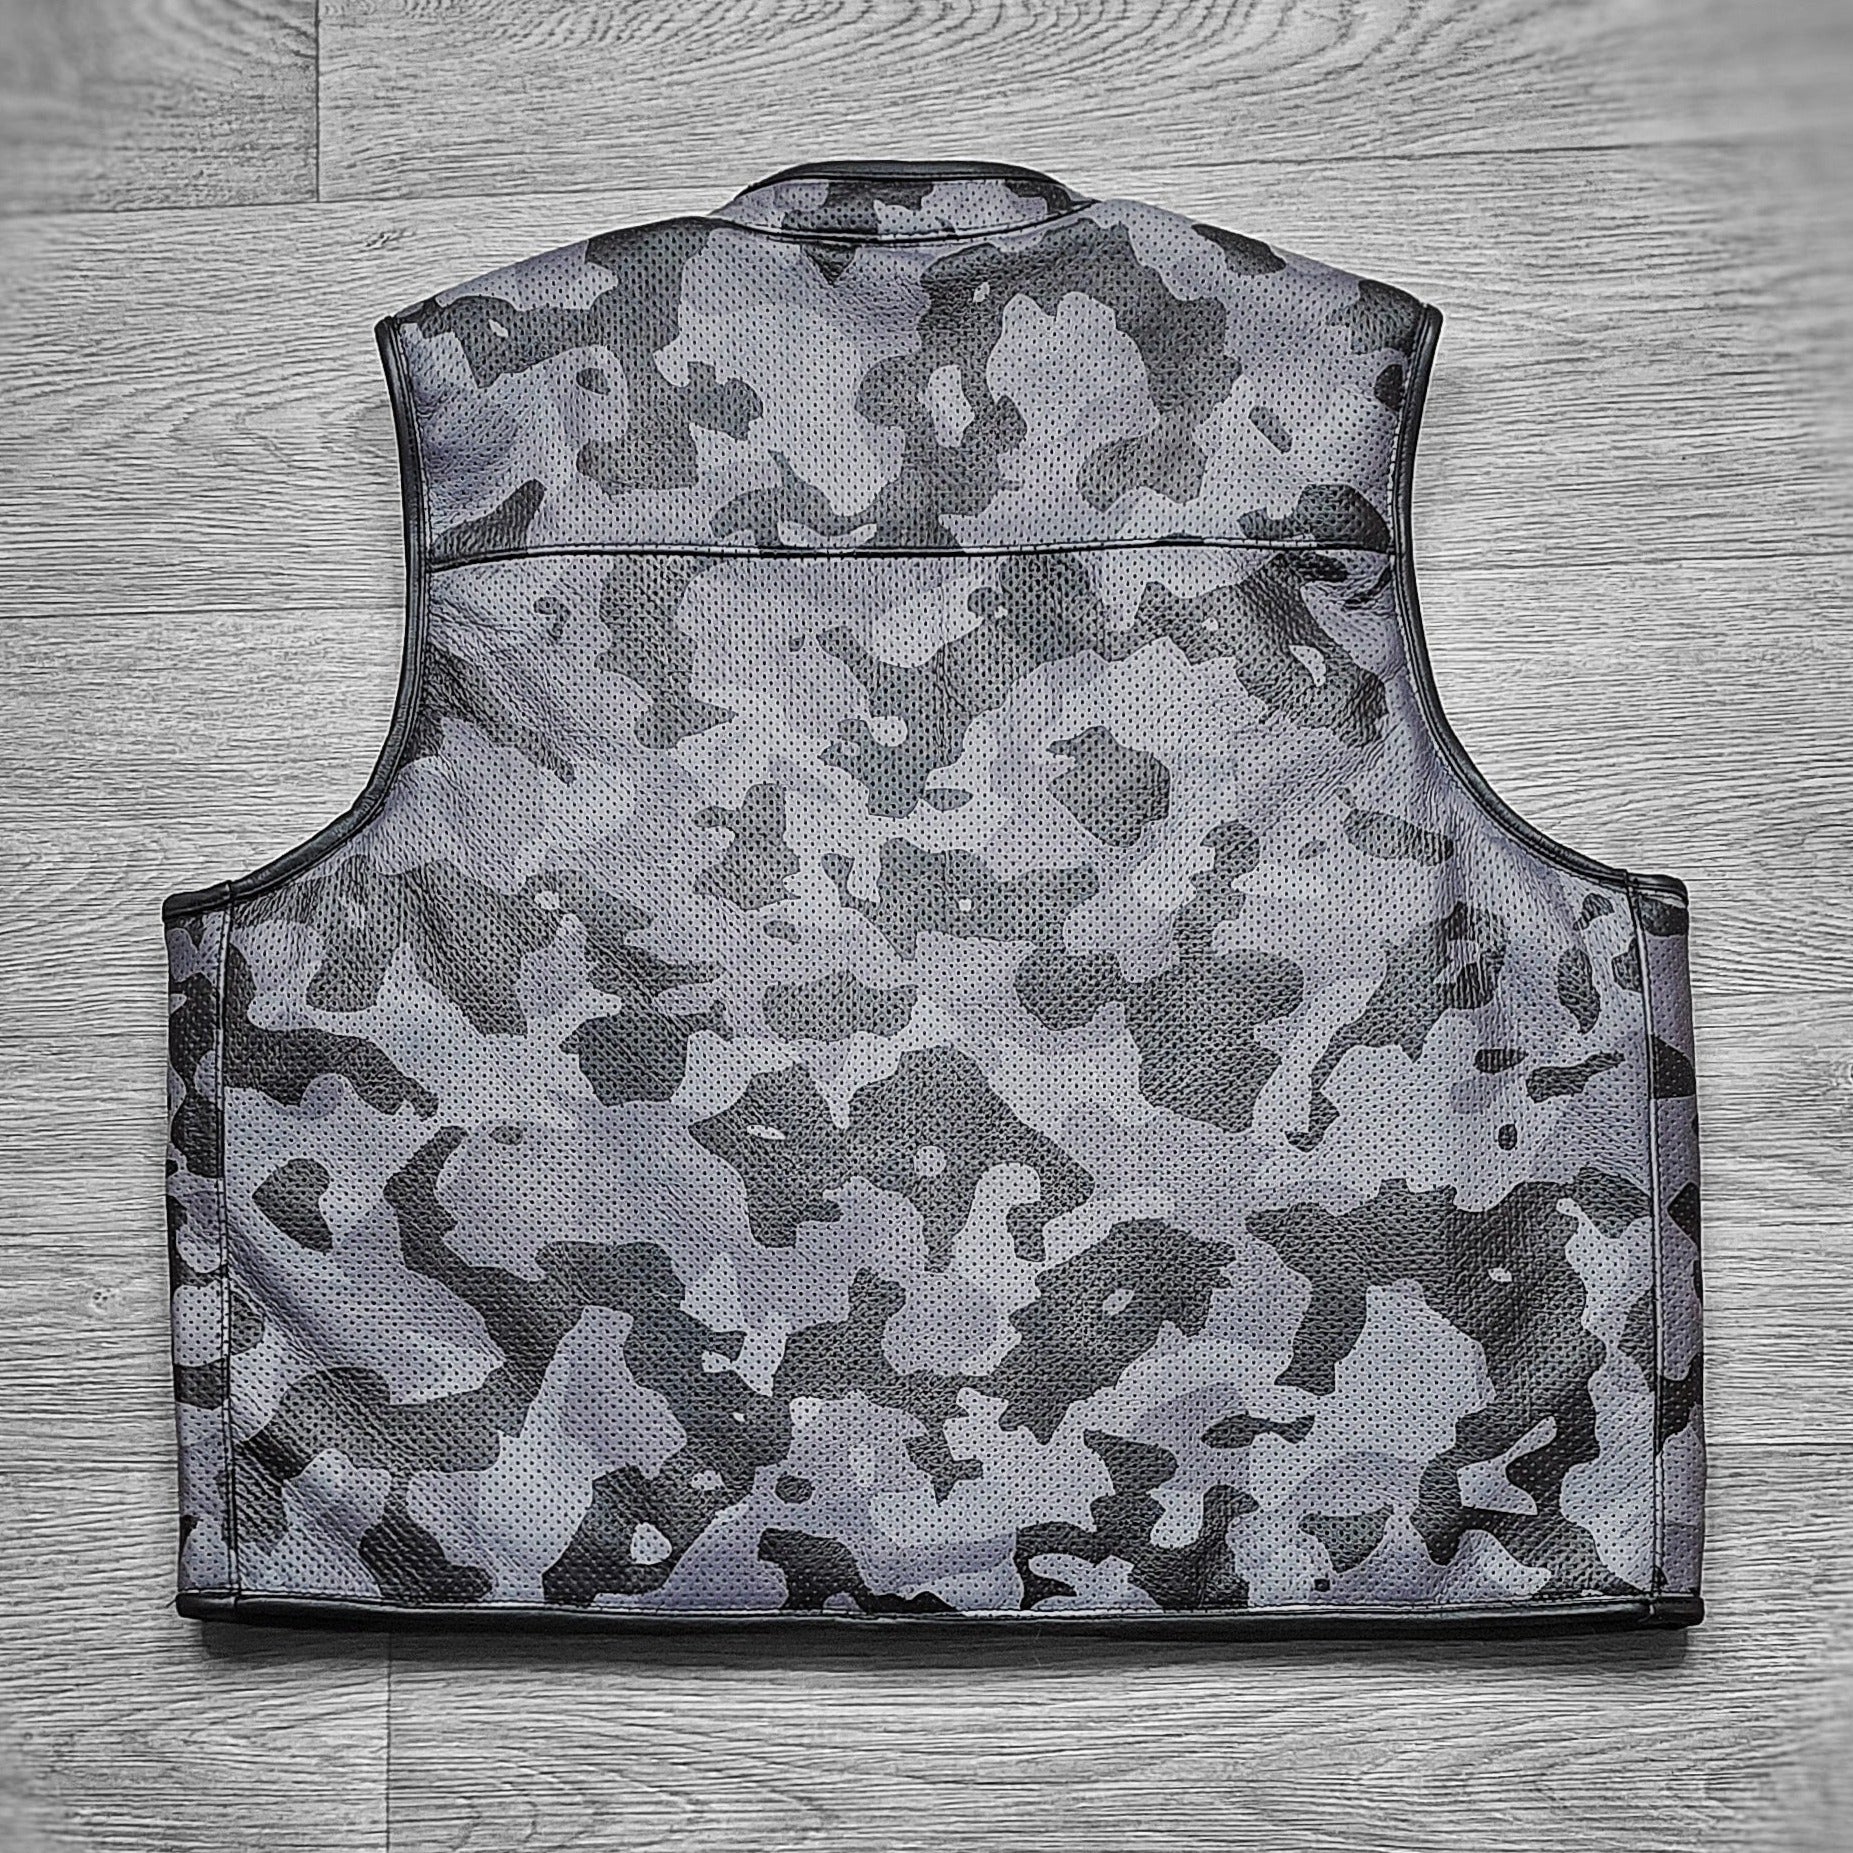 EURO STORM "OFF THE RACK" PERFORATED CAMO VEST